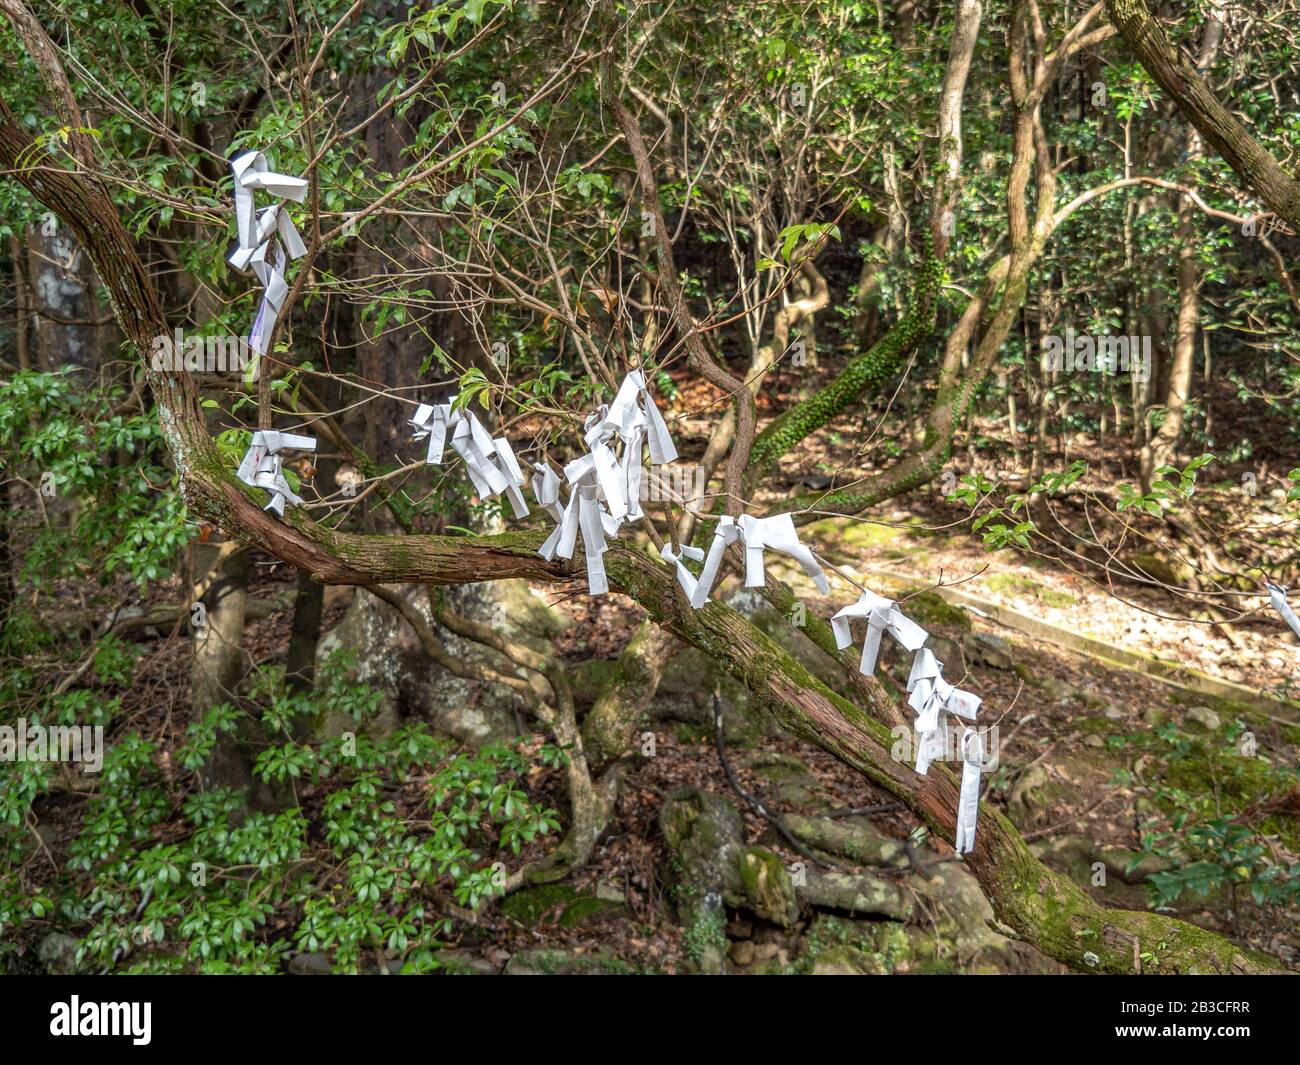 Prayers written on folded white paper and tied to tree in Kyoto, Japan. Stock Photo